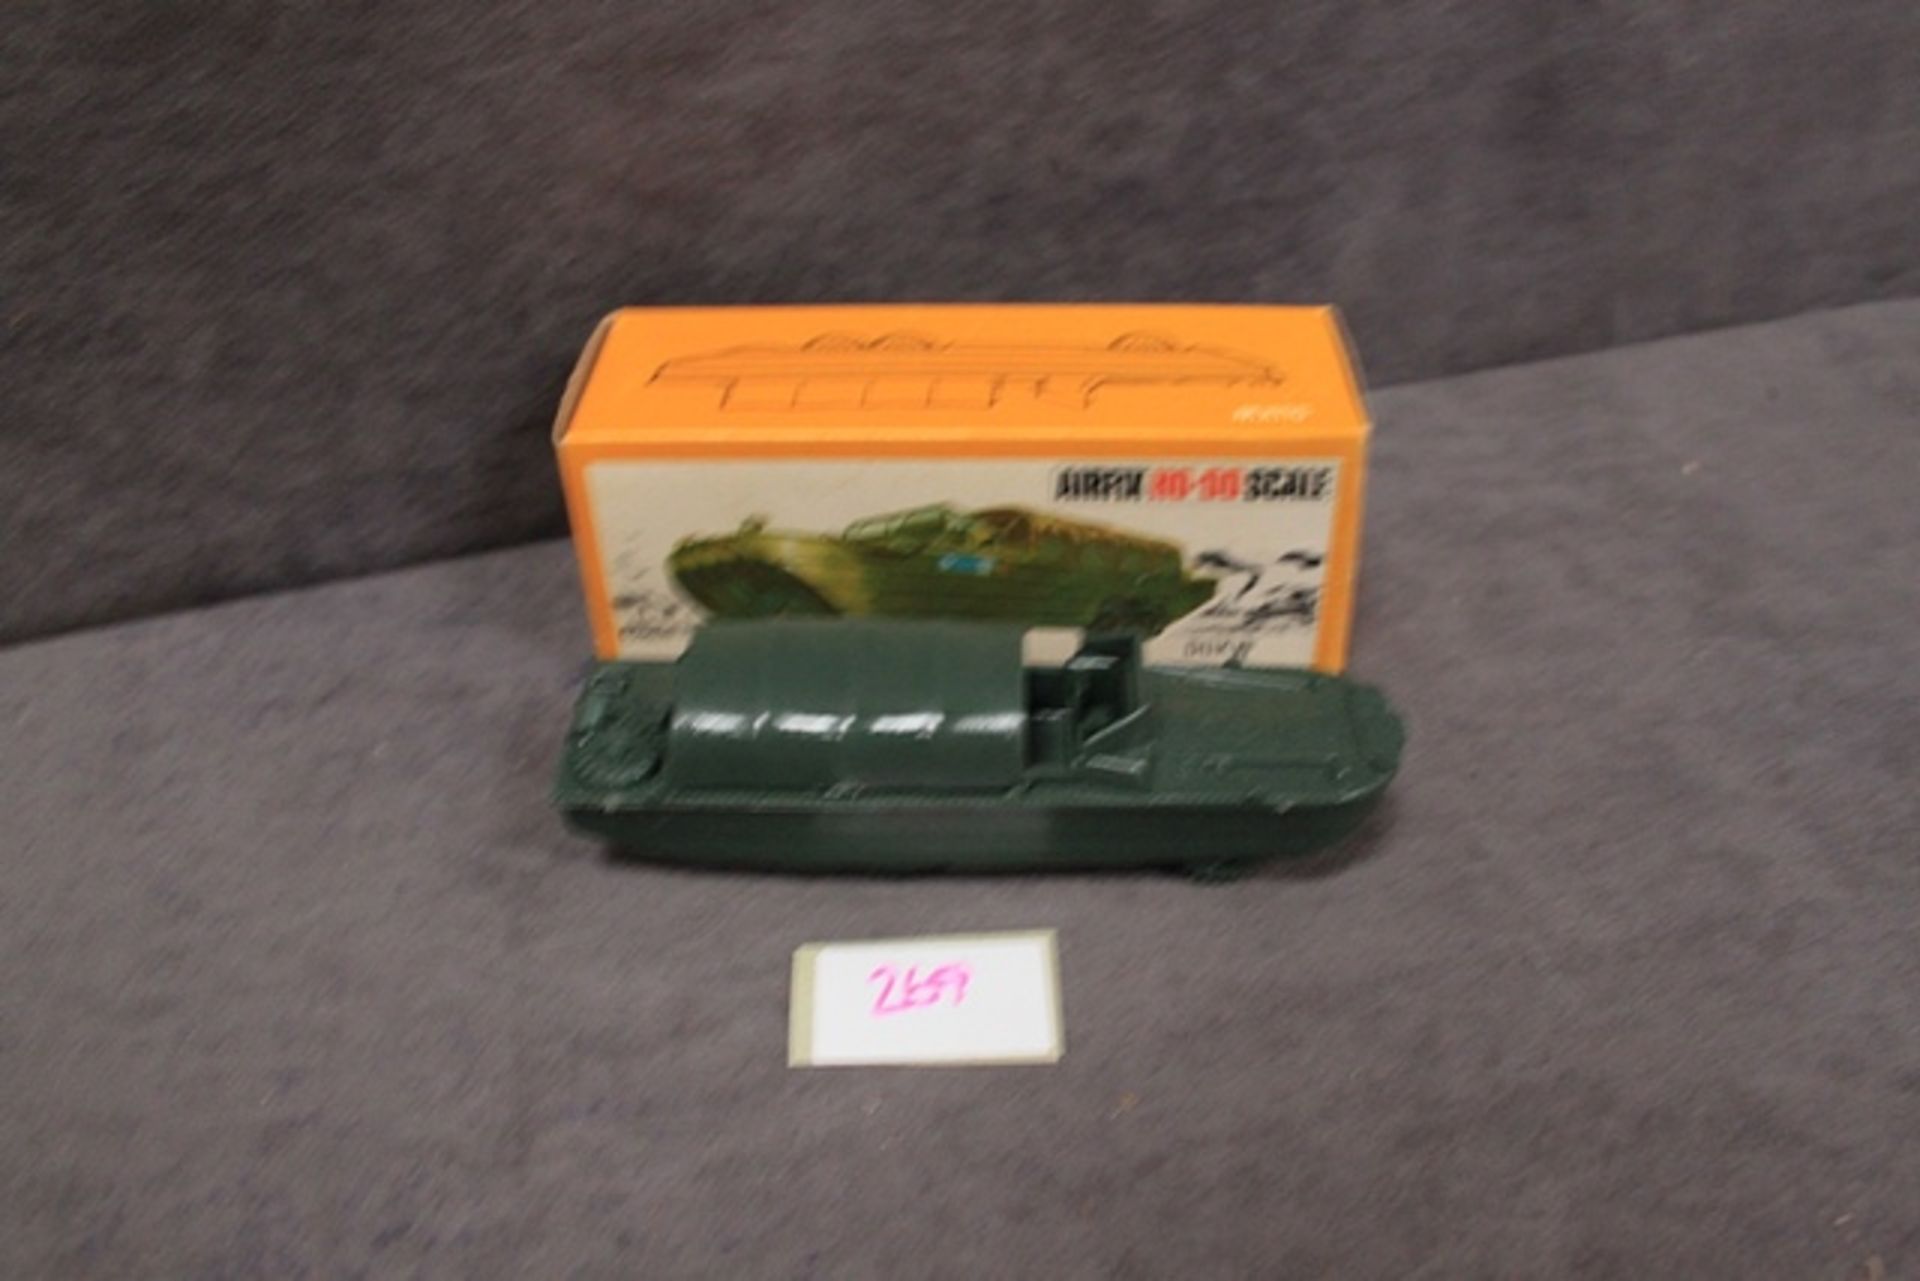 Airfix H0-00 Scale DUKW in box